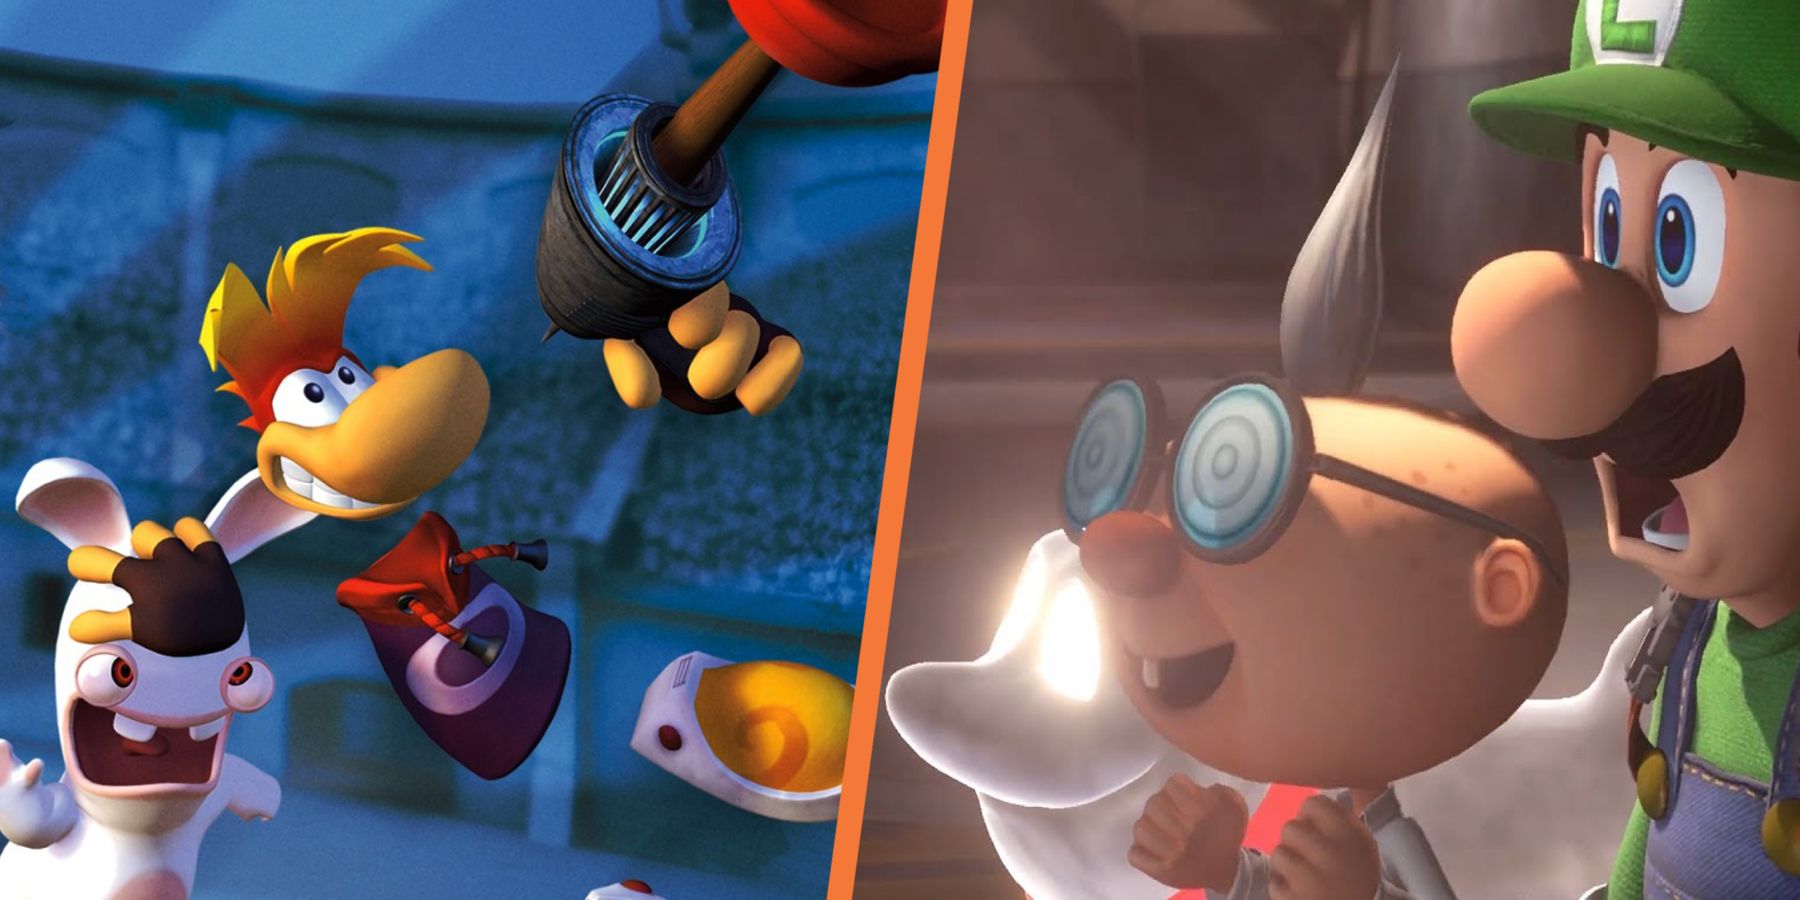 Rayman and Rabbids on the left, with Luigi and E Gadd on the right.